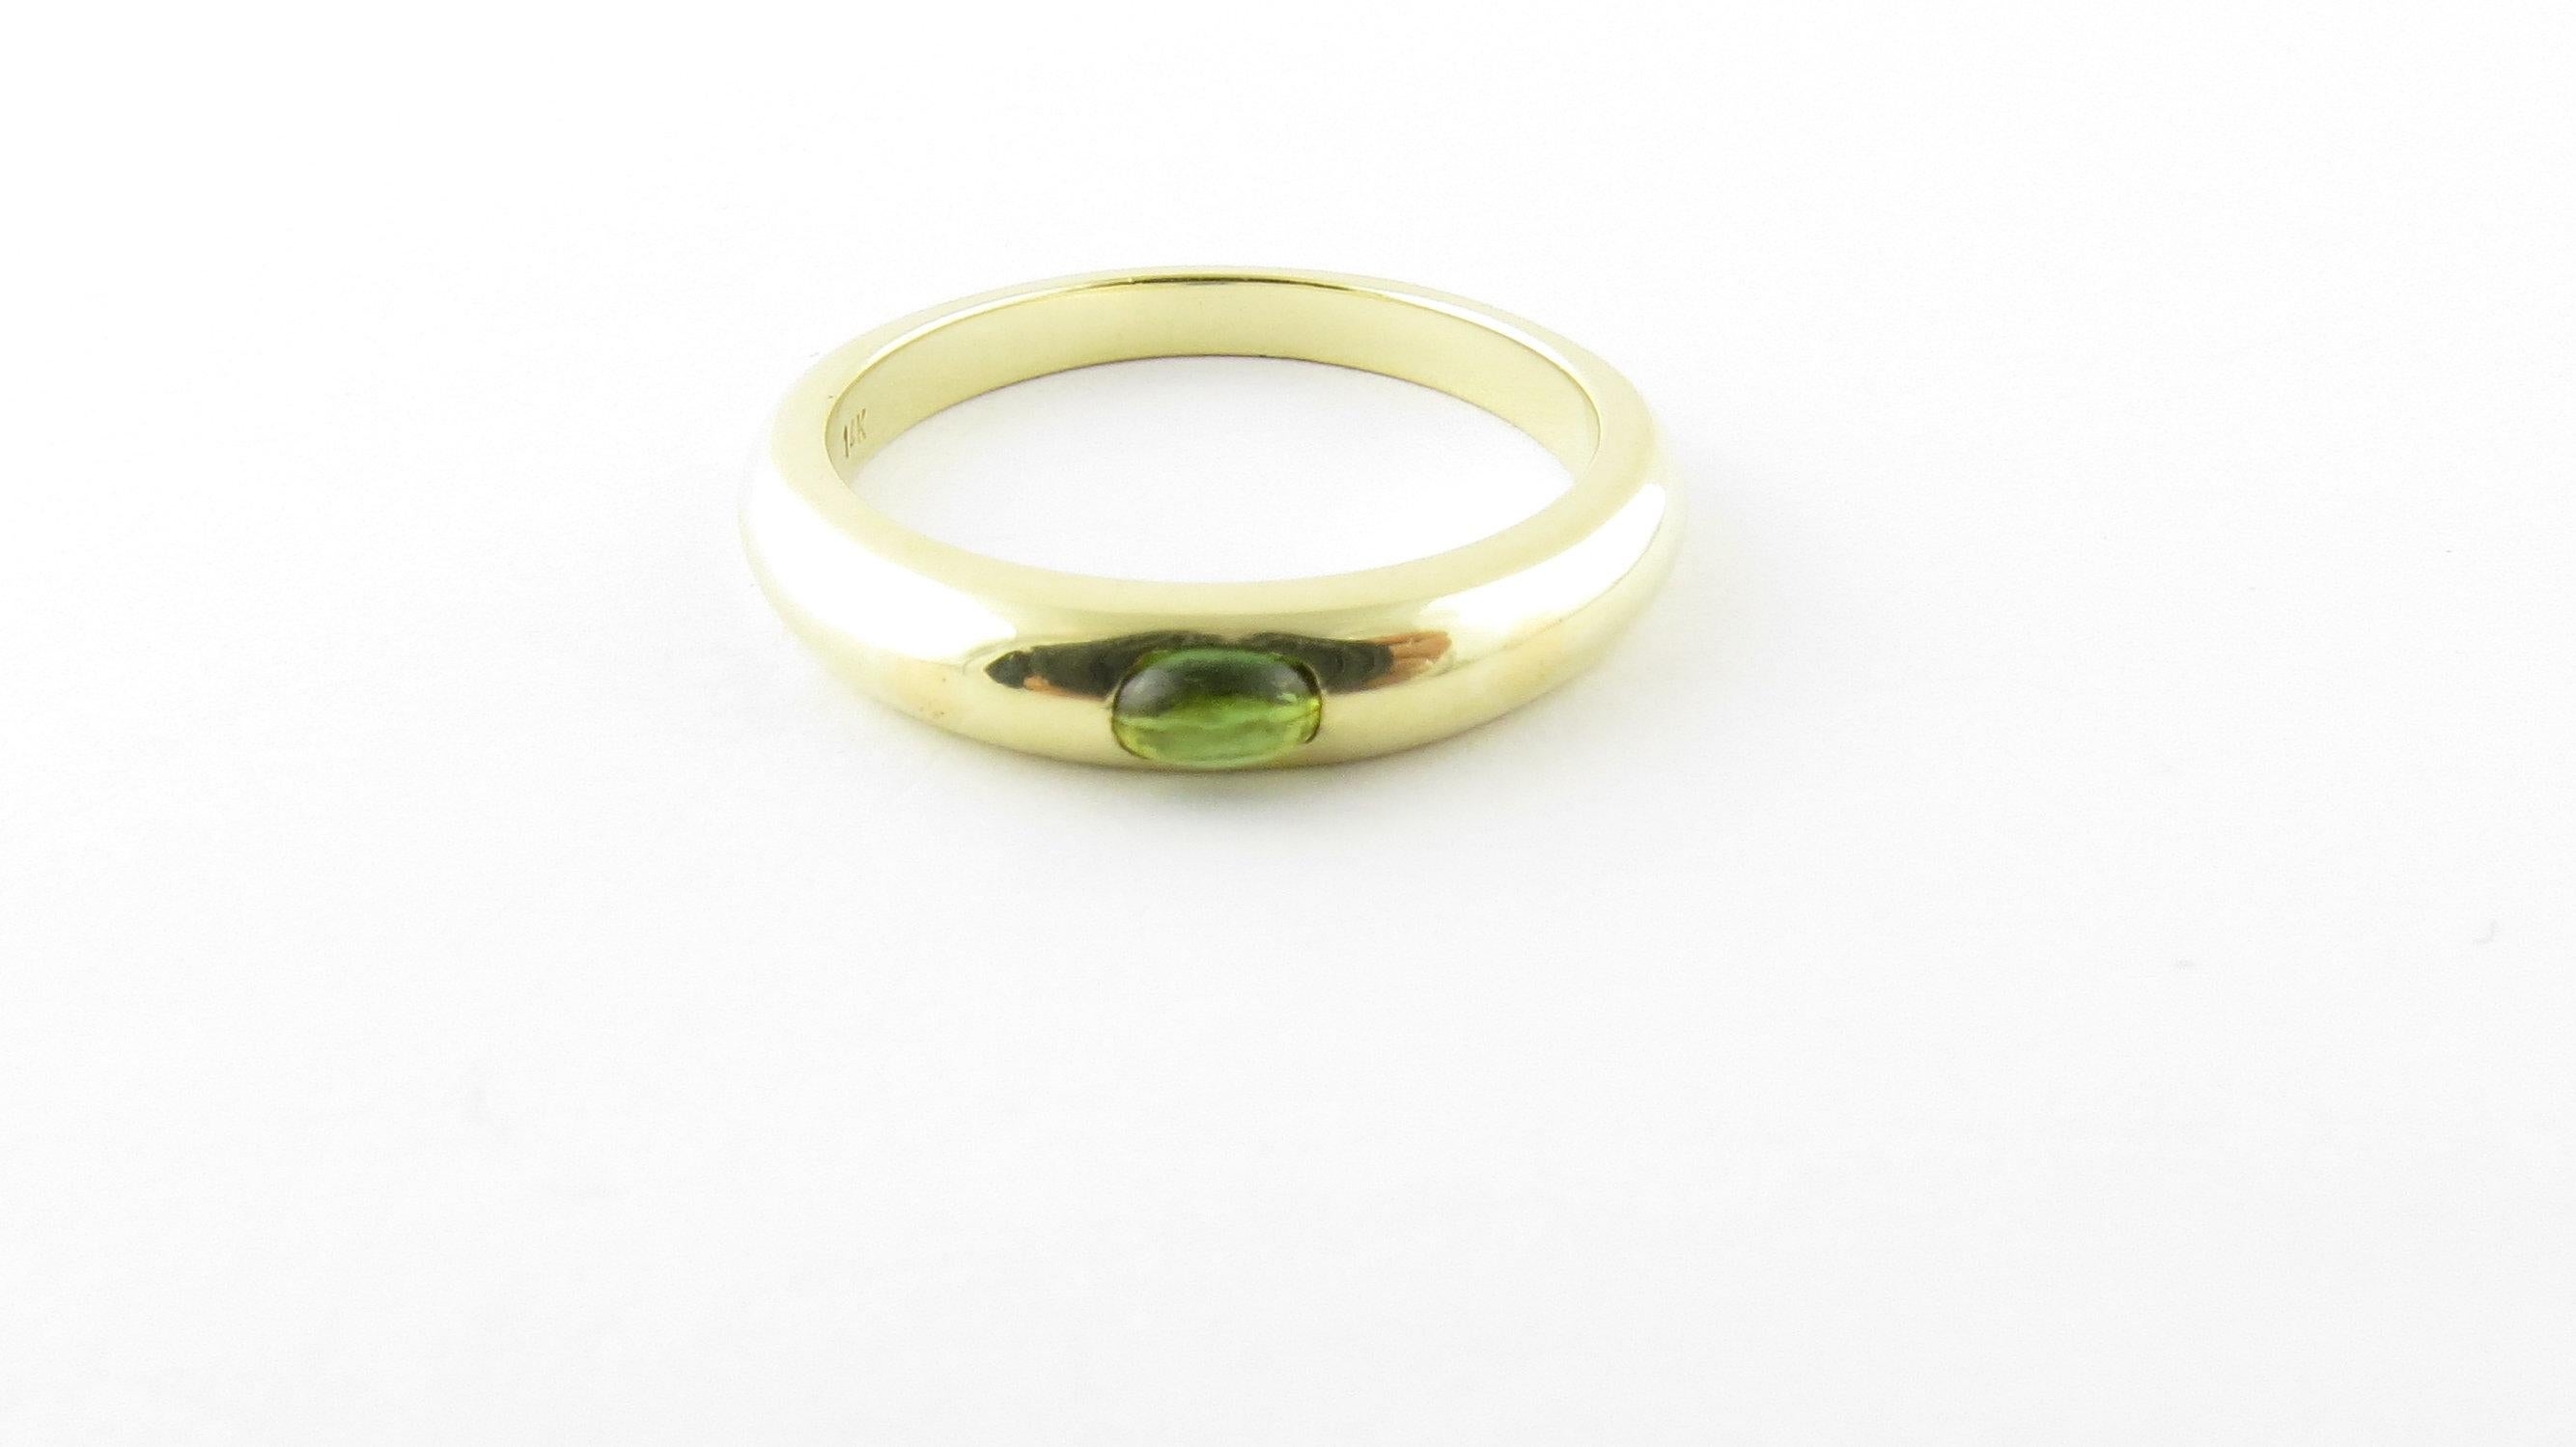 Vintage 14 Karat Yellow Gold Genuine Cabochon Peridot Stackable Ring Size 8.5. This elegant ring features one genuine cabochon peridot (5 mm x 3 mm) set in a polished 14K yellow gold band. 
Ring Width: 4 mm. Shank: 2 mm.

Available matching